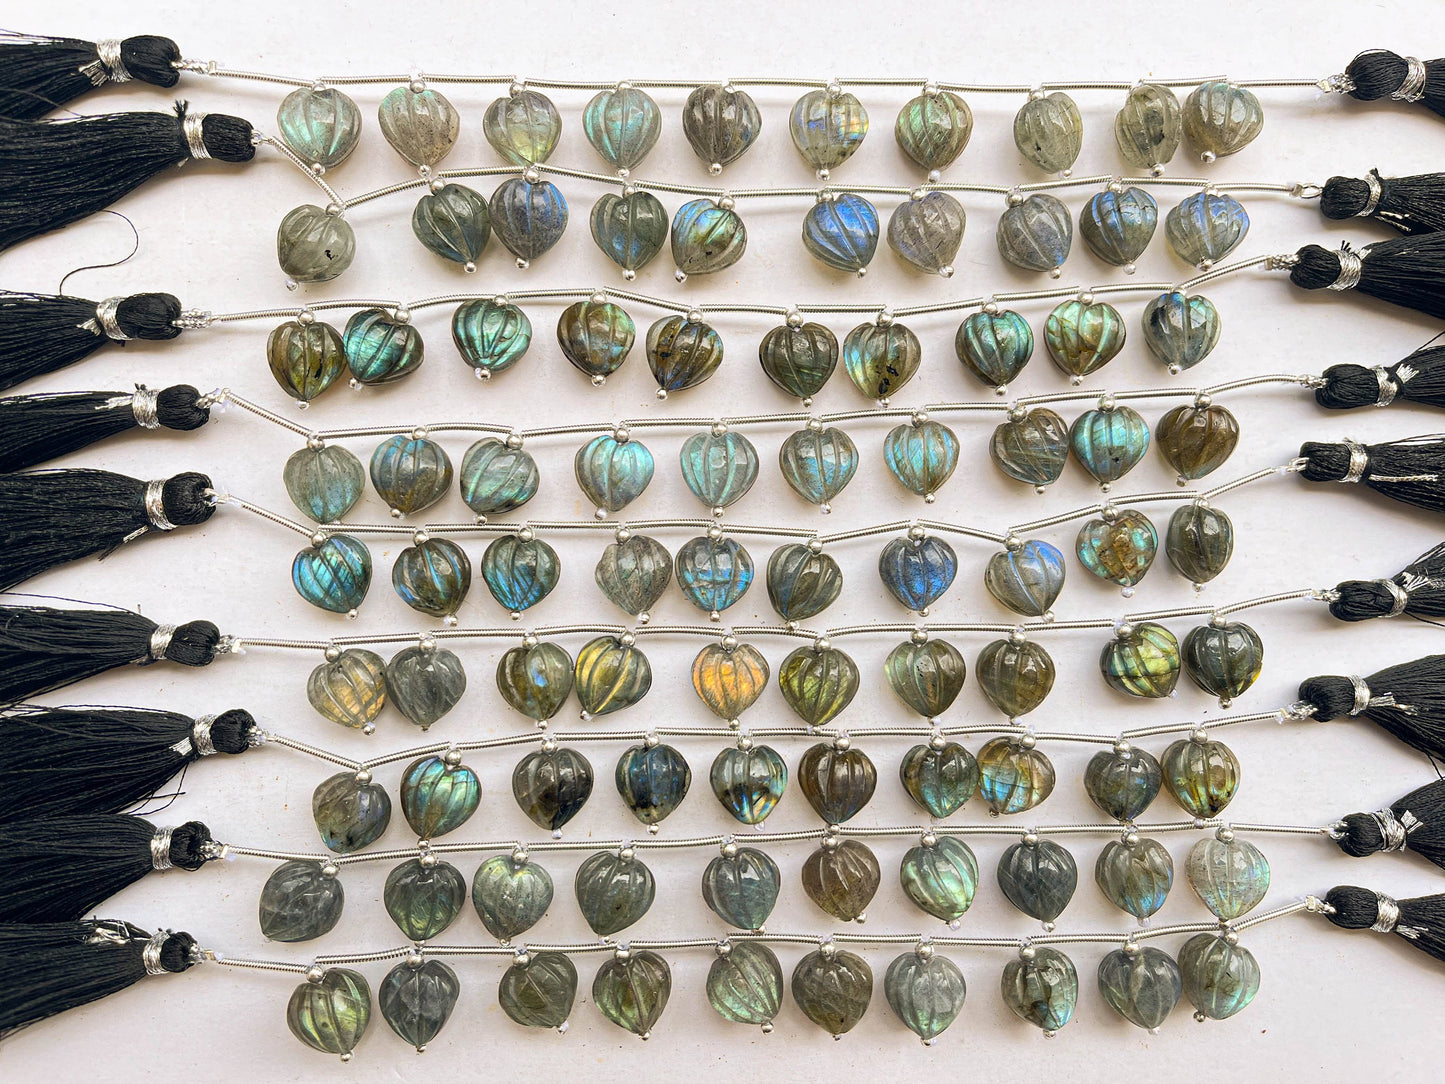 Labradorite Carved Heart Shape Beads, 10x11mm, 10 Pieces, Natural Gemstone Beads for Jewelry Making, Beadsforyourjewellery